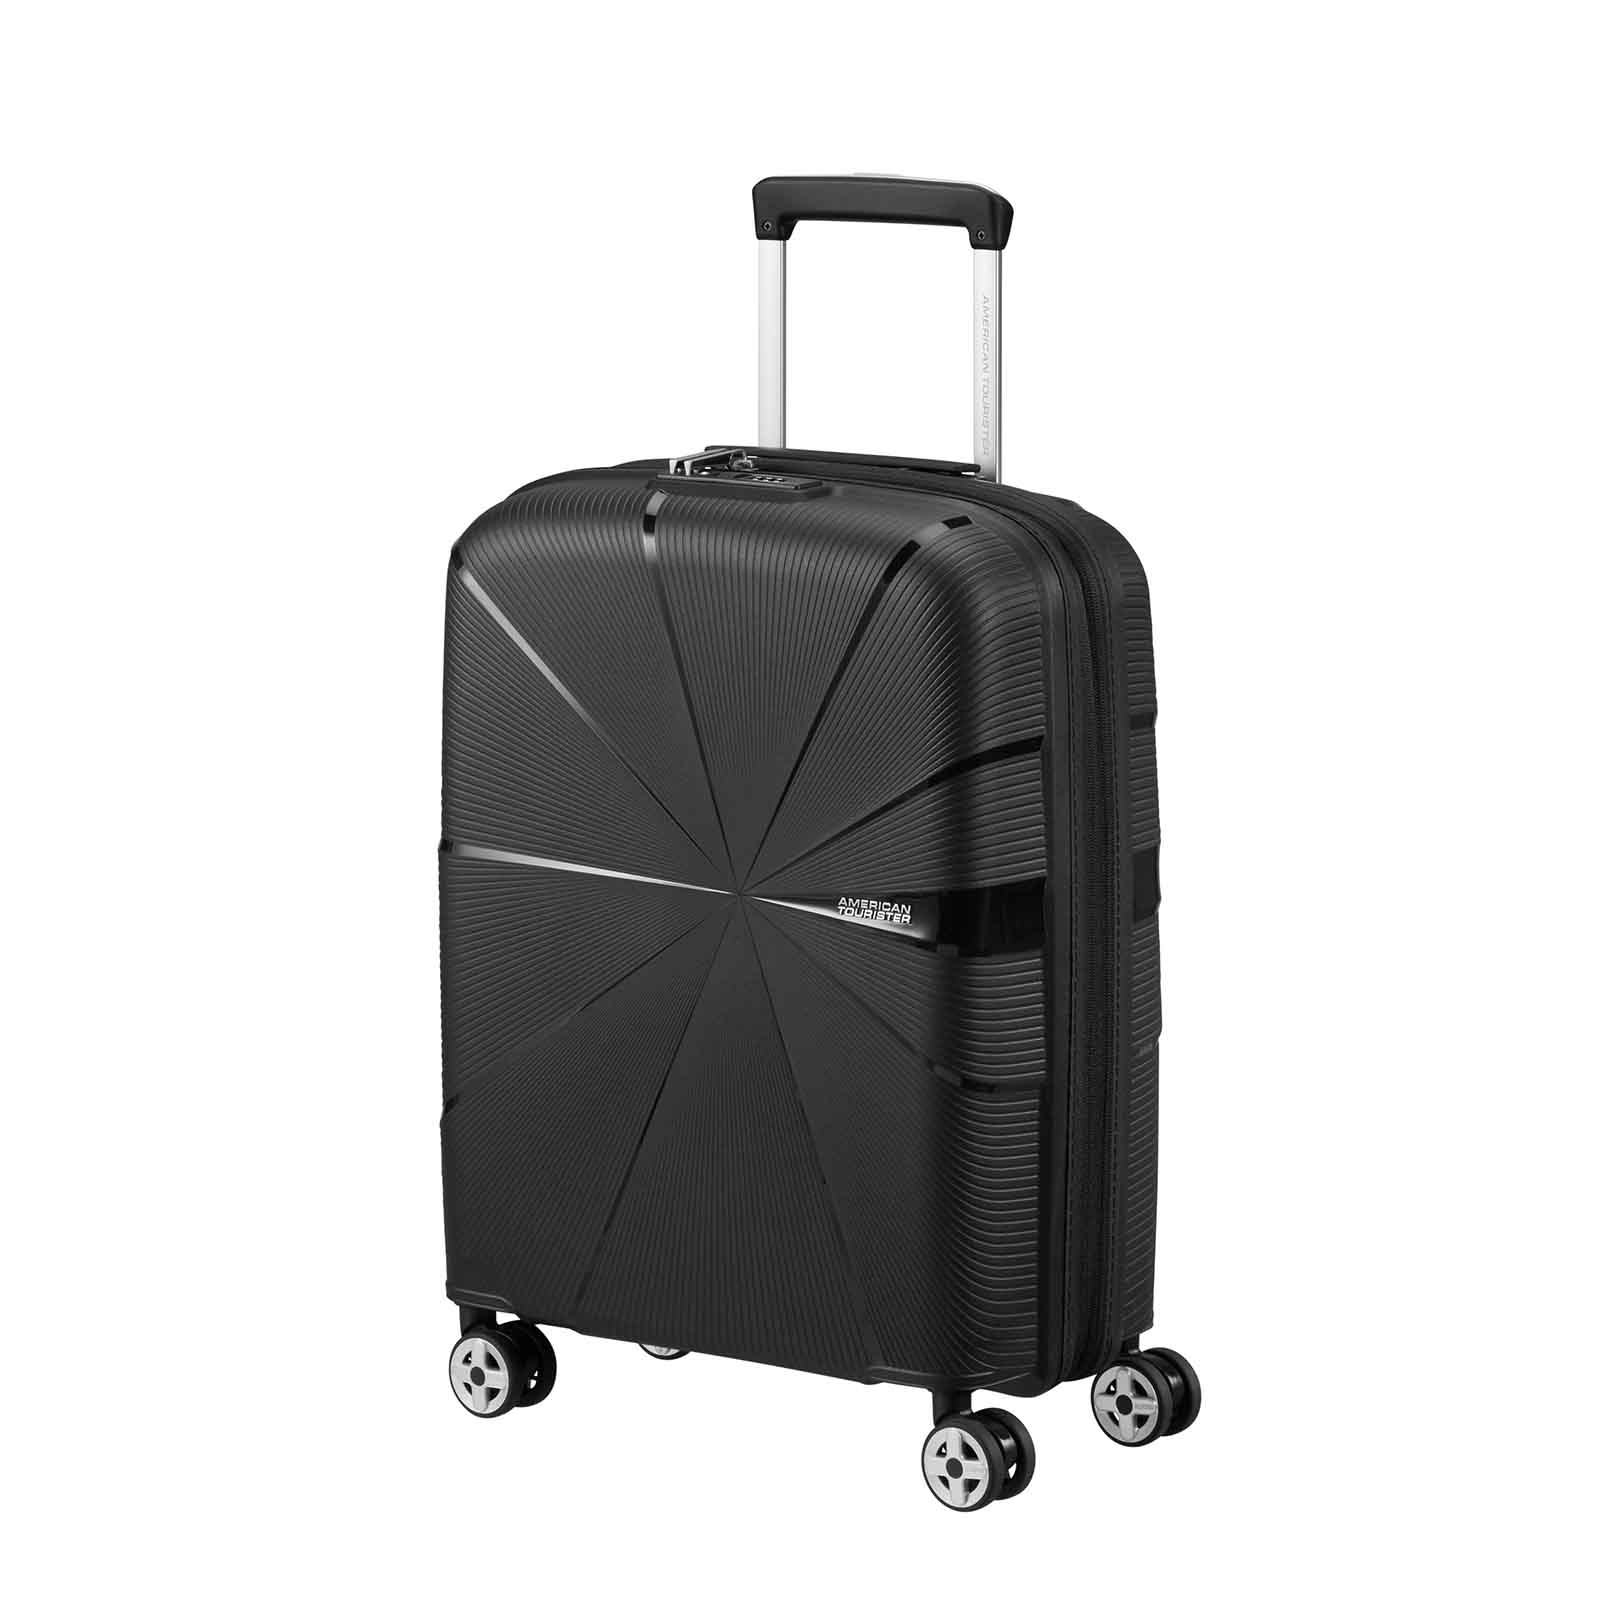 American-Tourister-Starvibe-55cm-Carry-On-Suitcase-Black-Angle